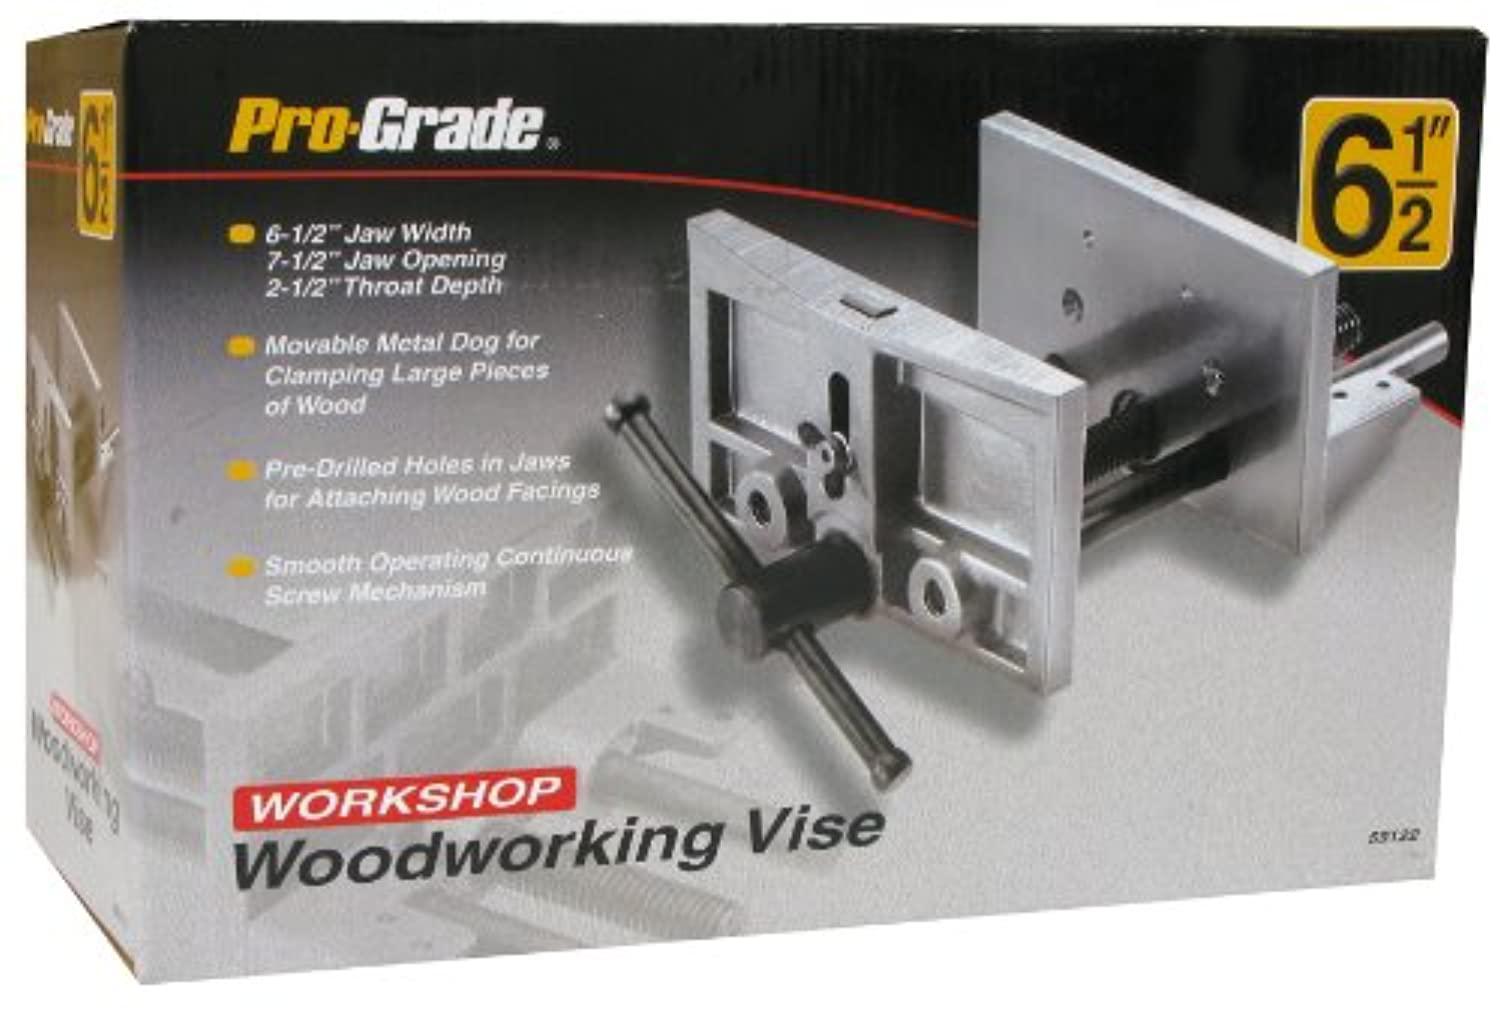 Pro-Grade Tools 6-1/2" hobby woodworkers vise